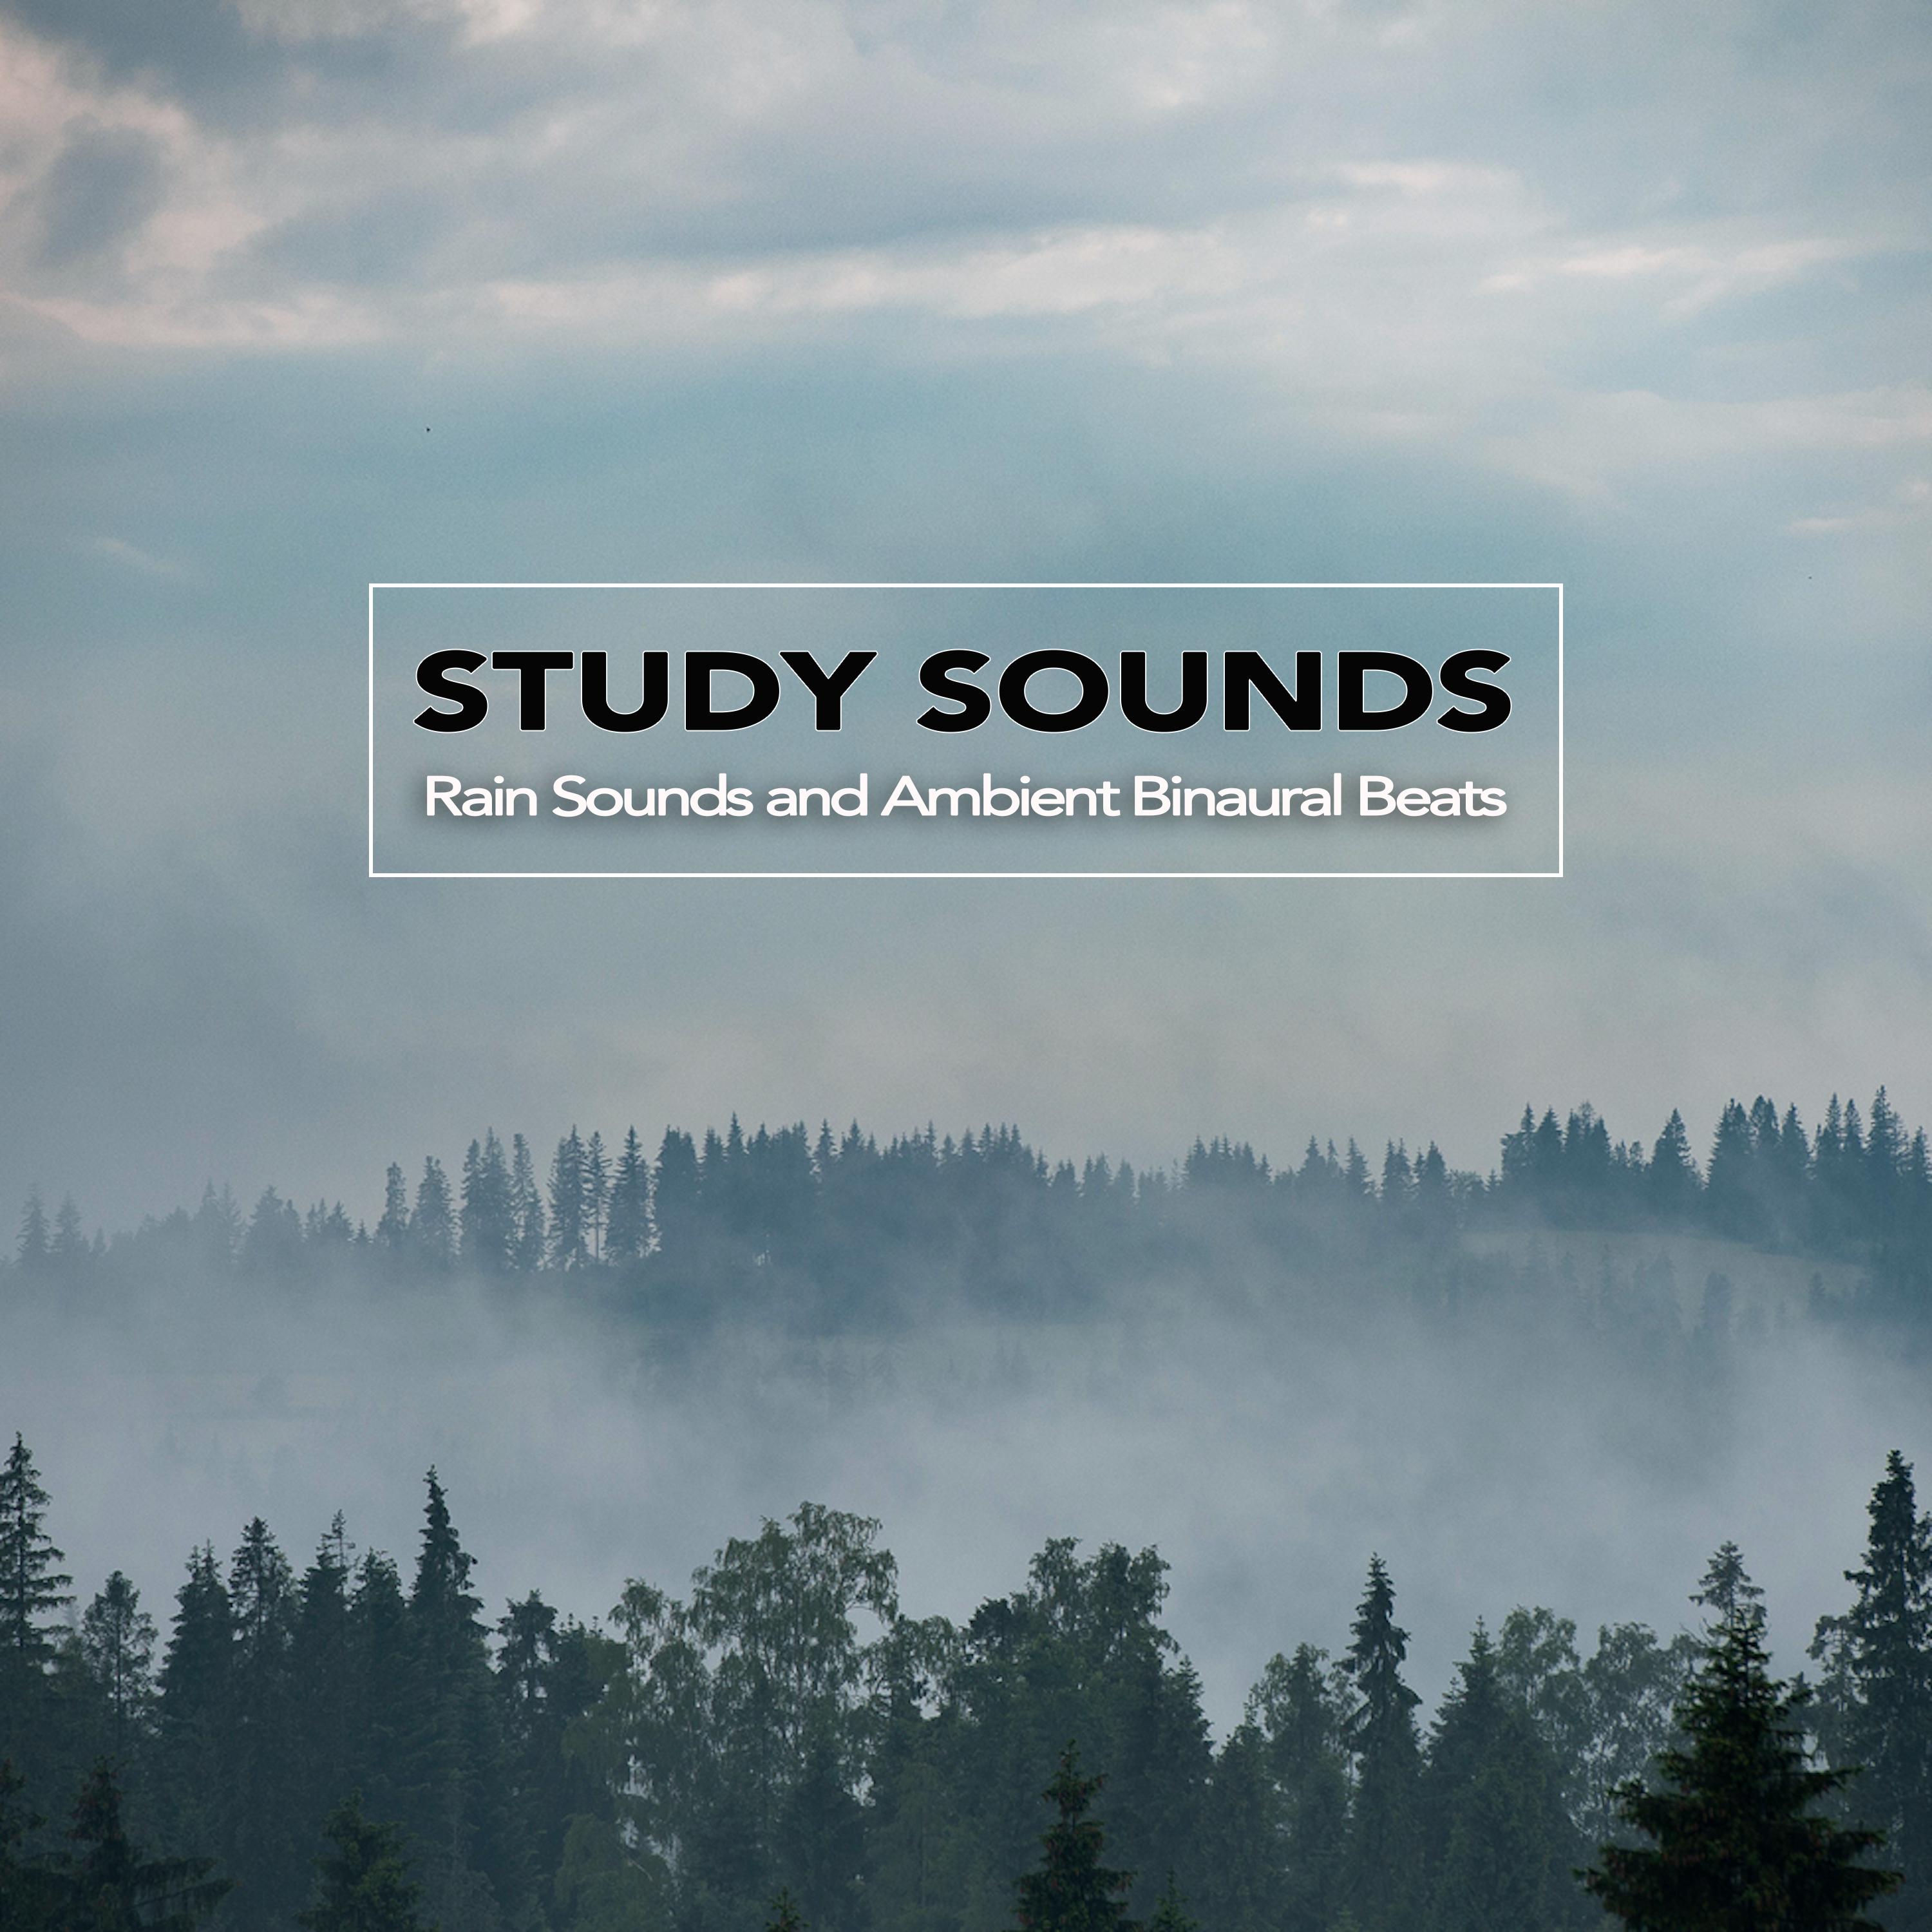 Sounds of Rain and Binaural Beats for Focus